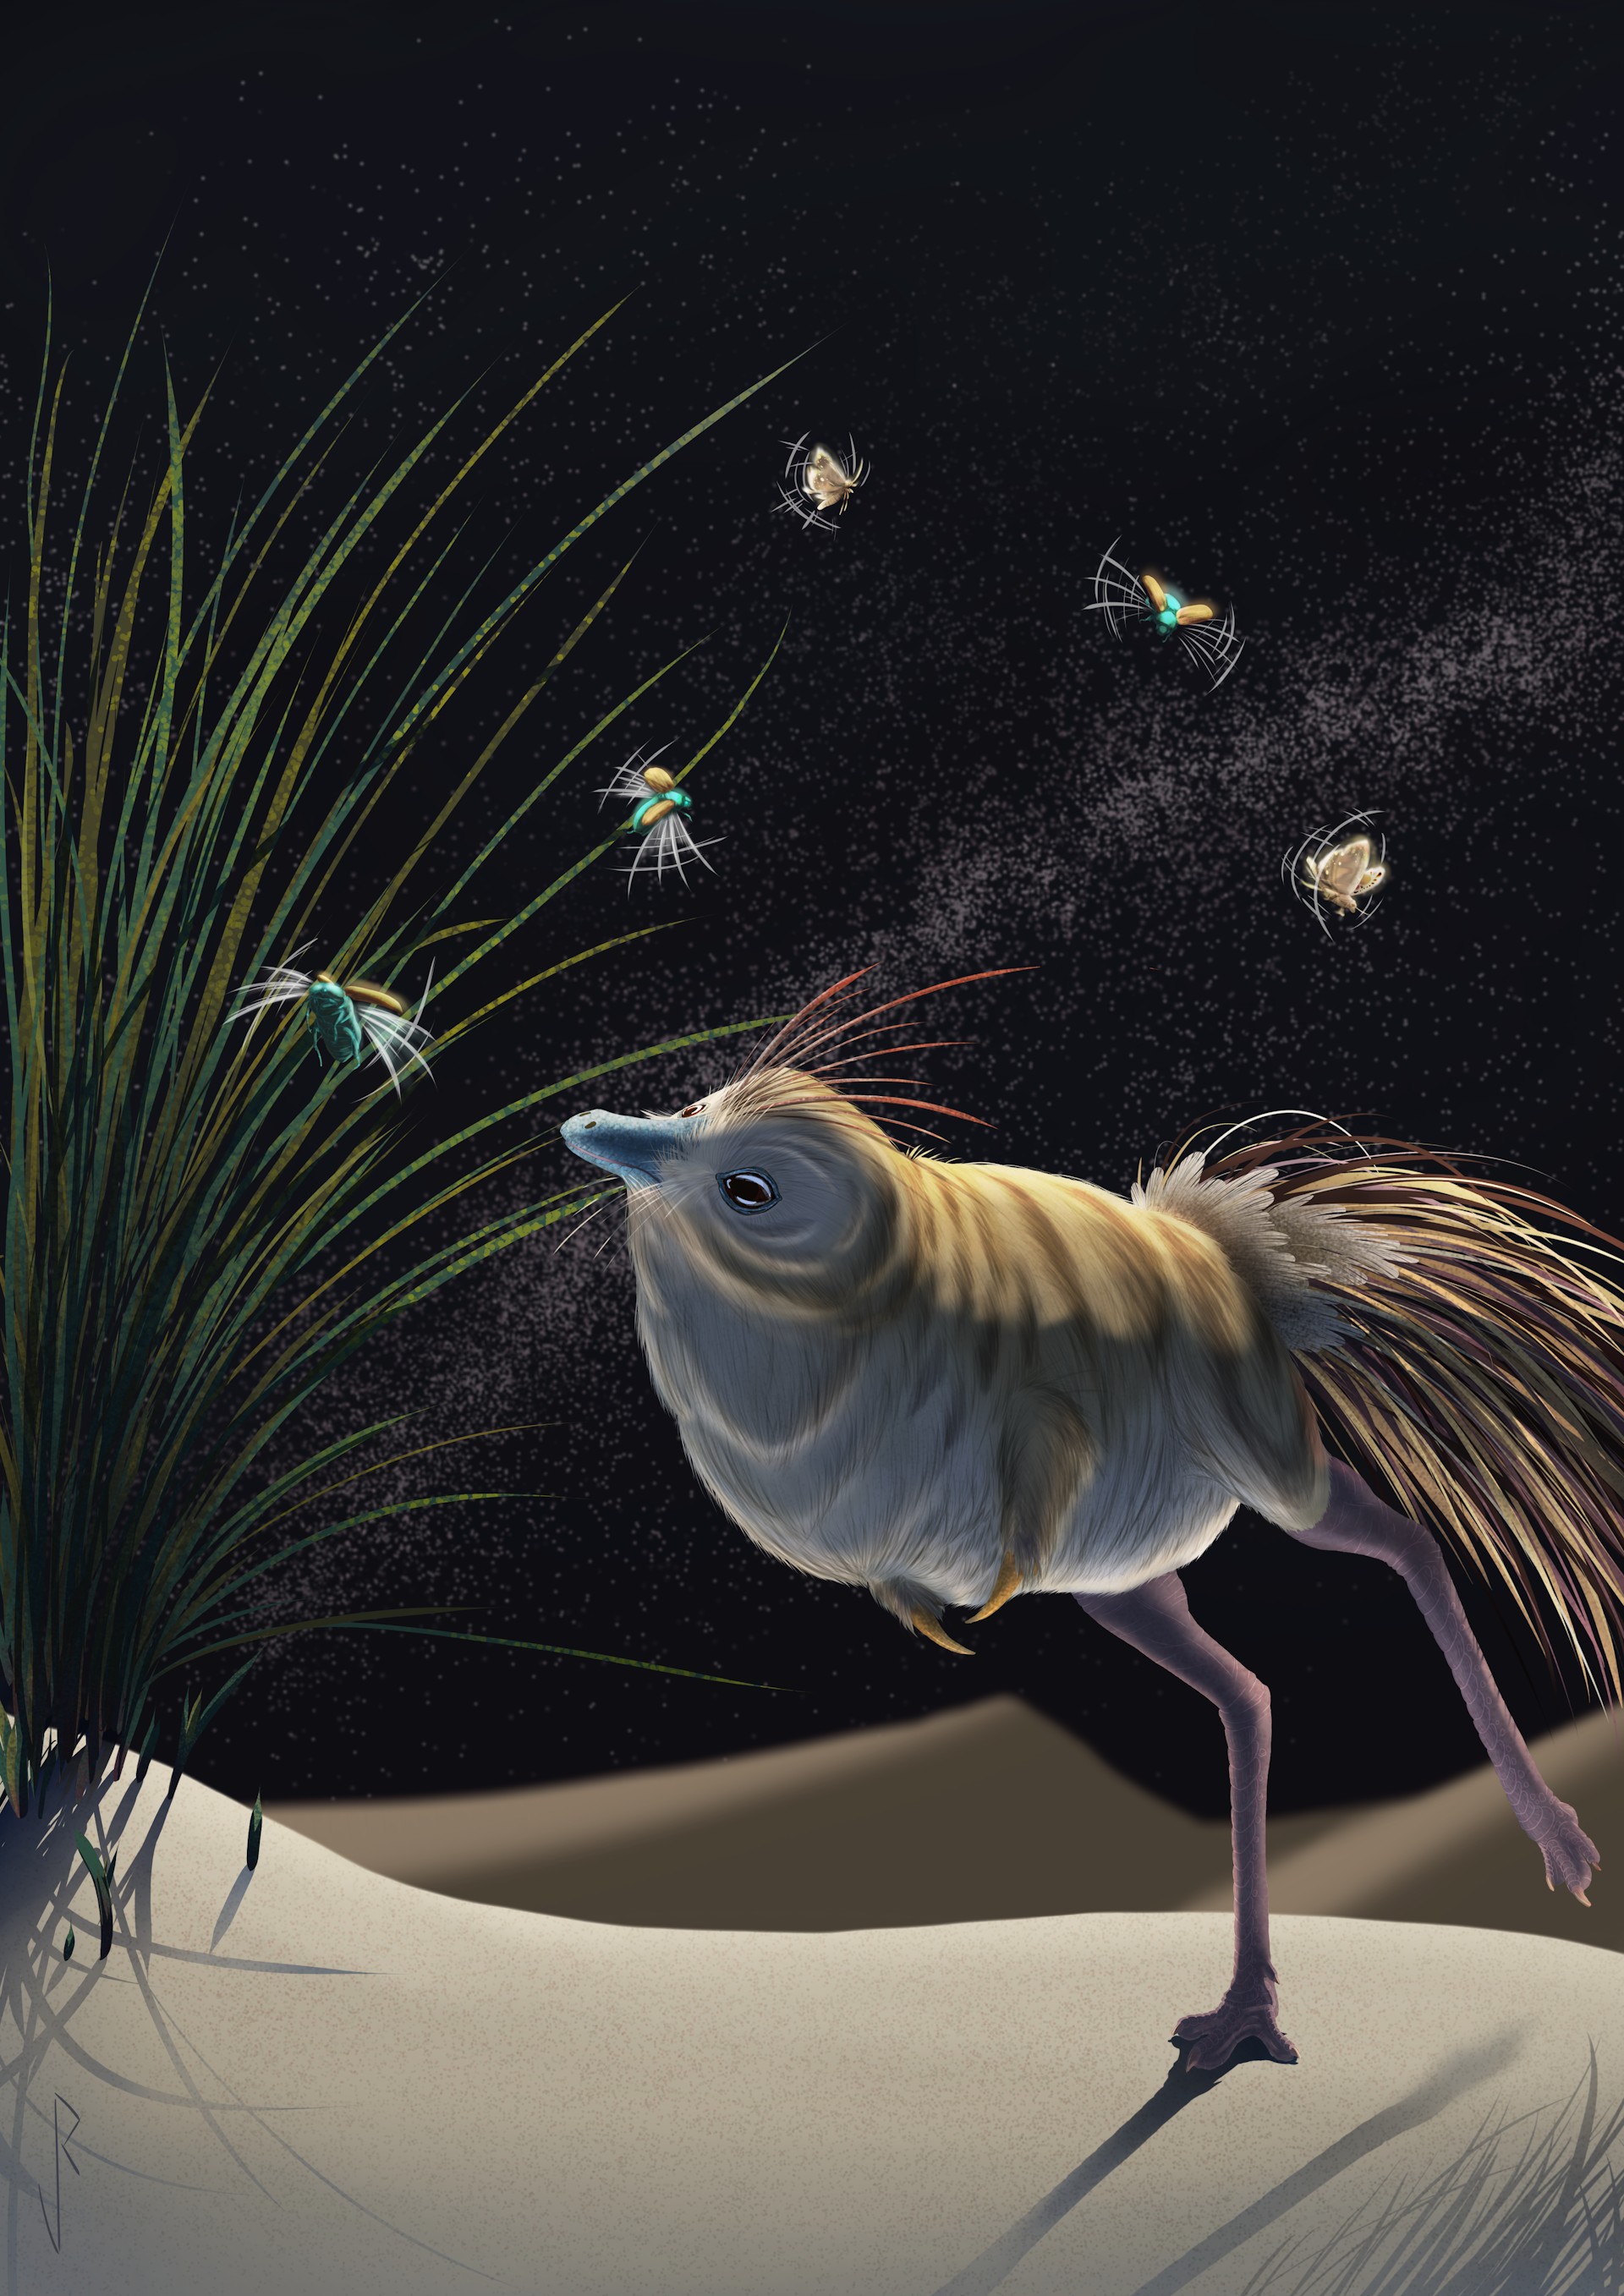 An artistic reconstruction showing _S. deserti as a small, feathered bipedal dinosaur with an owlish face